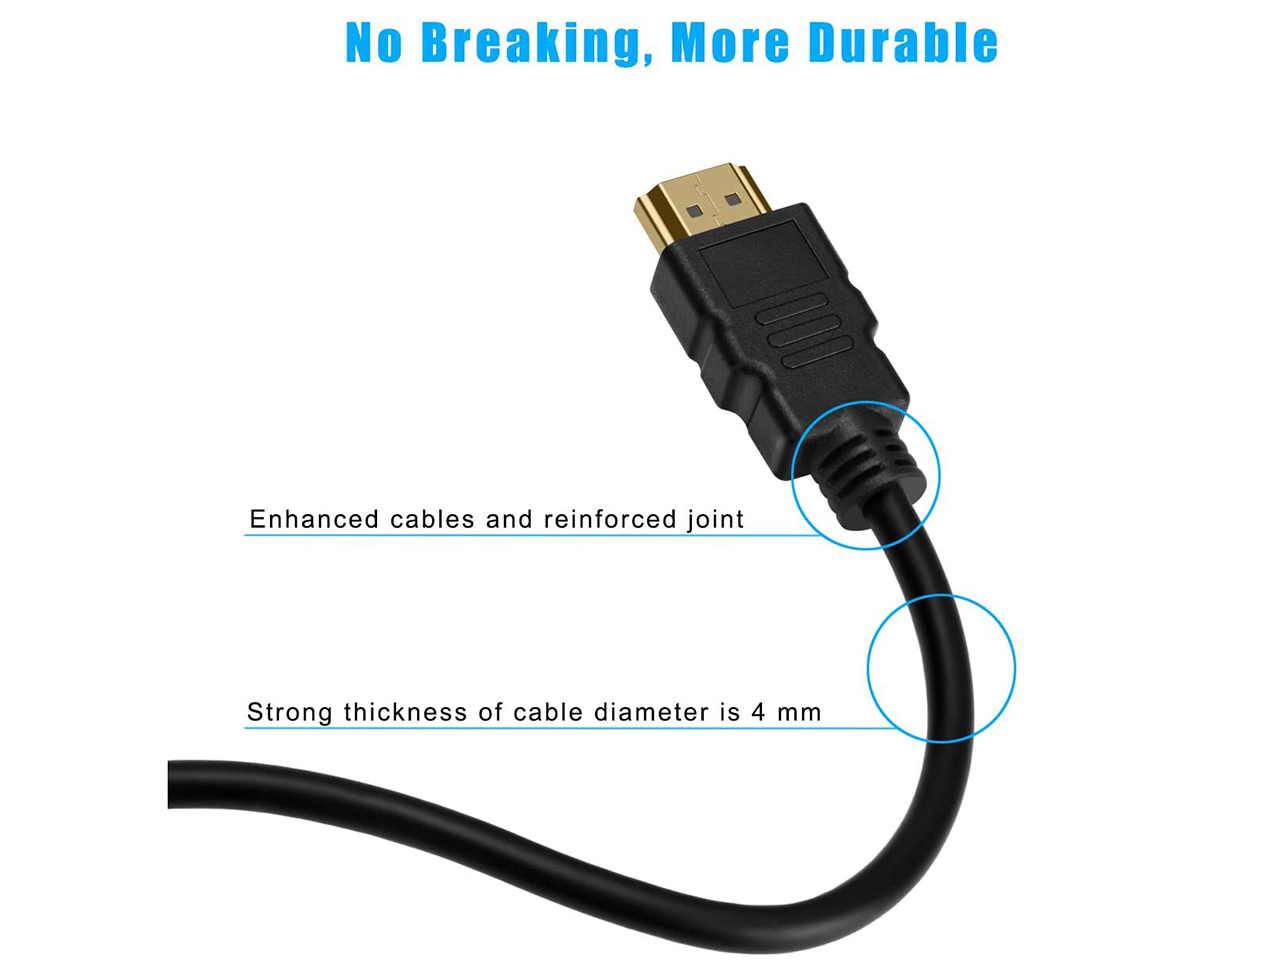 PC Laptop Xbox and More Projector Chromebook Raspberry Pi Male to Female HDMI to VGA Roku 1080P Cable for Computer HDTV Black Desktop Monitor iNassen Gold-Plated HDMI to VGA Adapter 